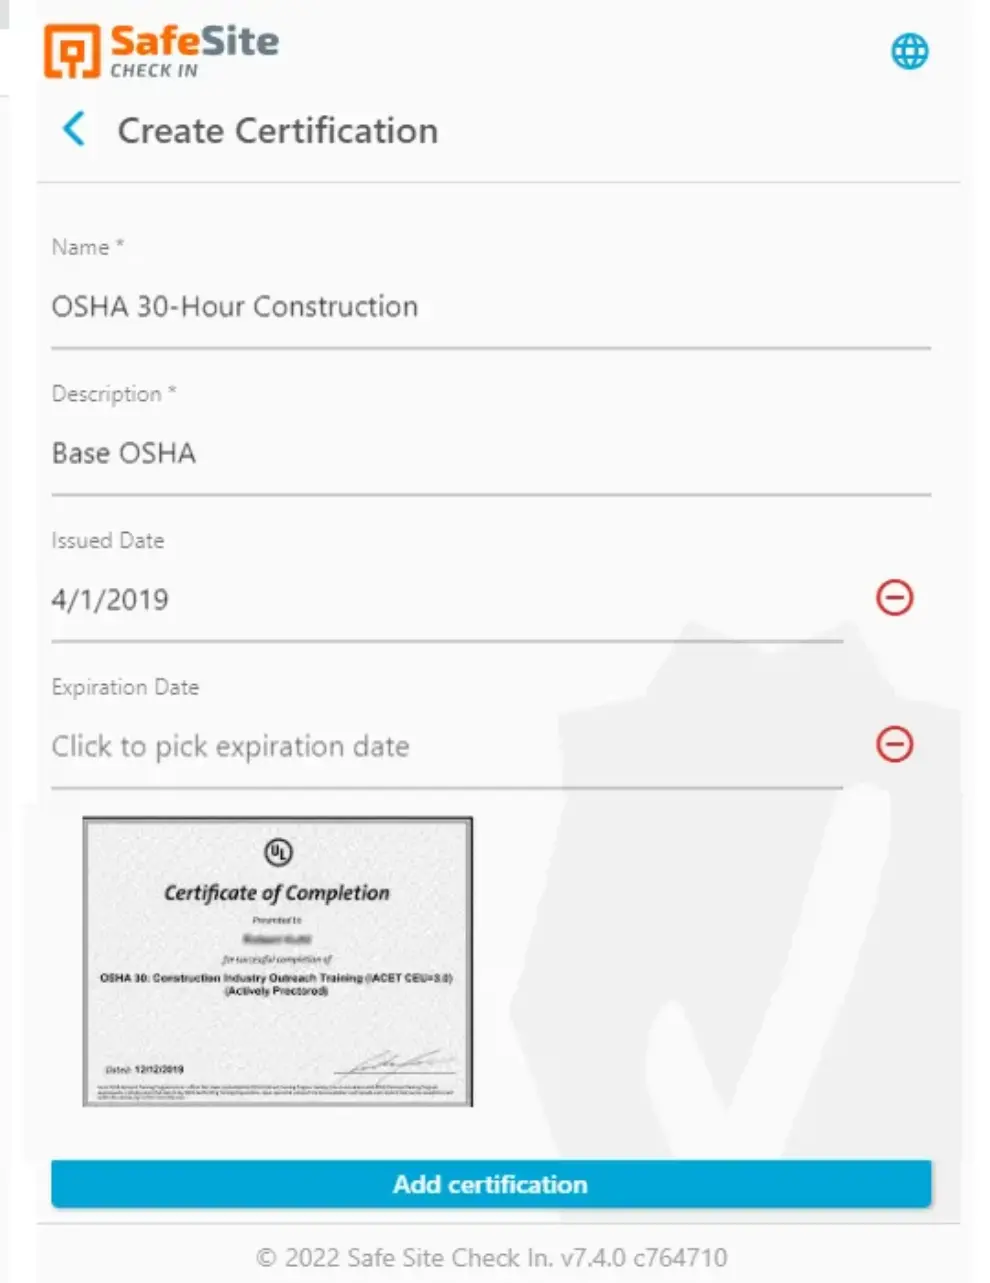 Safe Site Check In Brings Digital Transformation to Construction Workforce Management